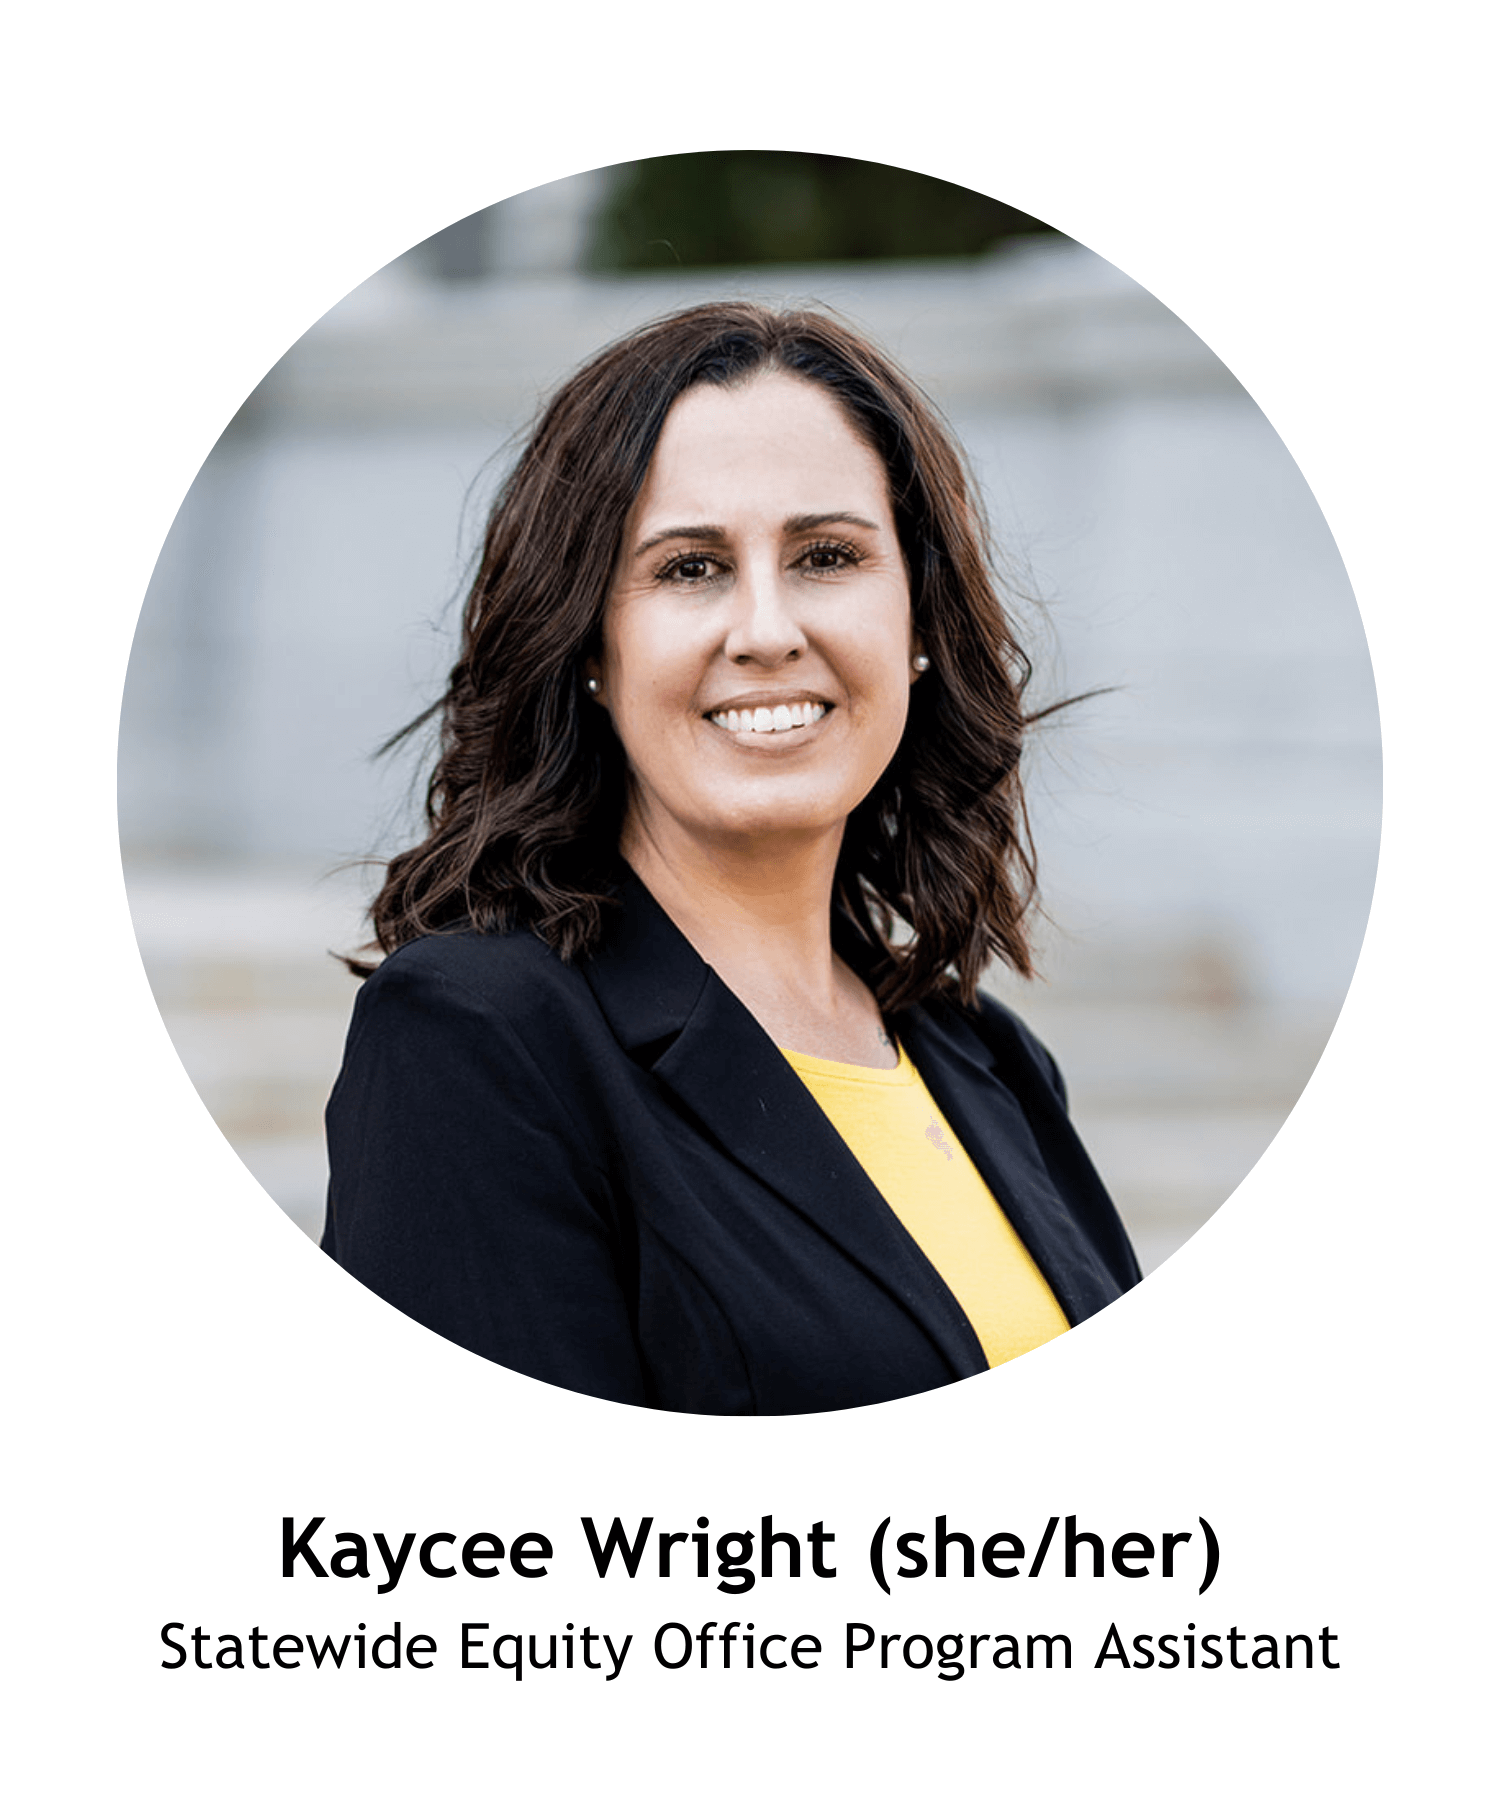 Kaycee Wright (she/her), Statewide Equity Office Program Assistant